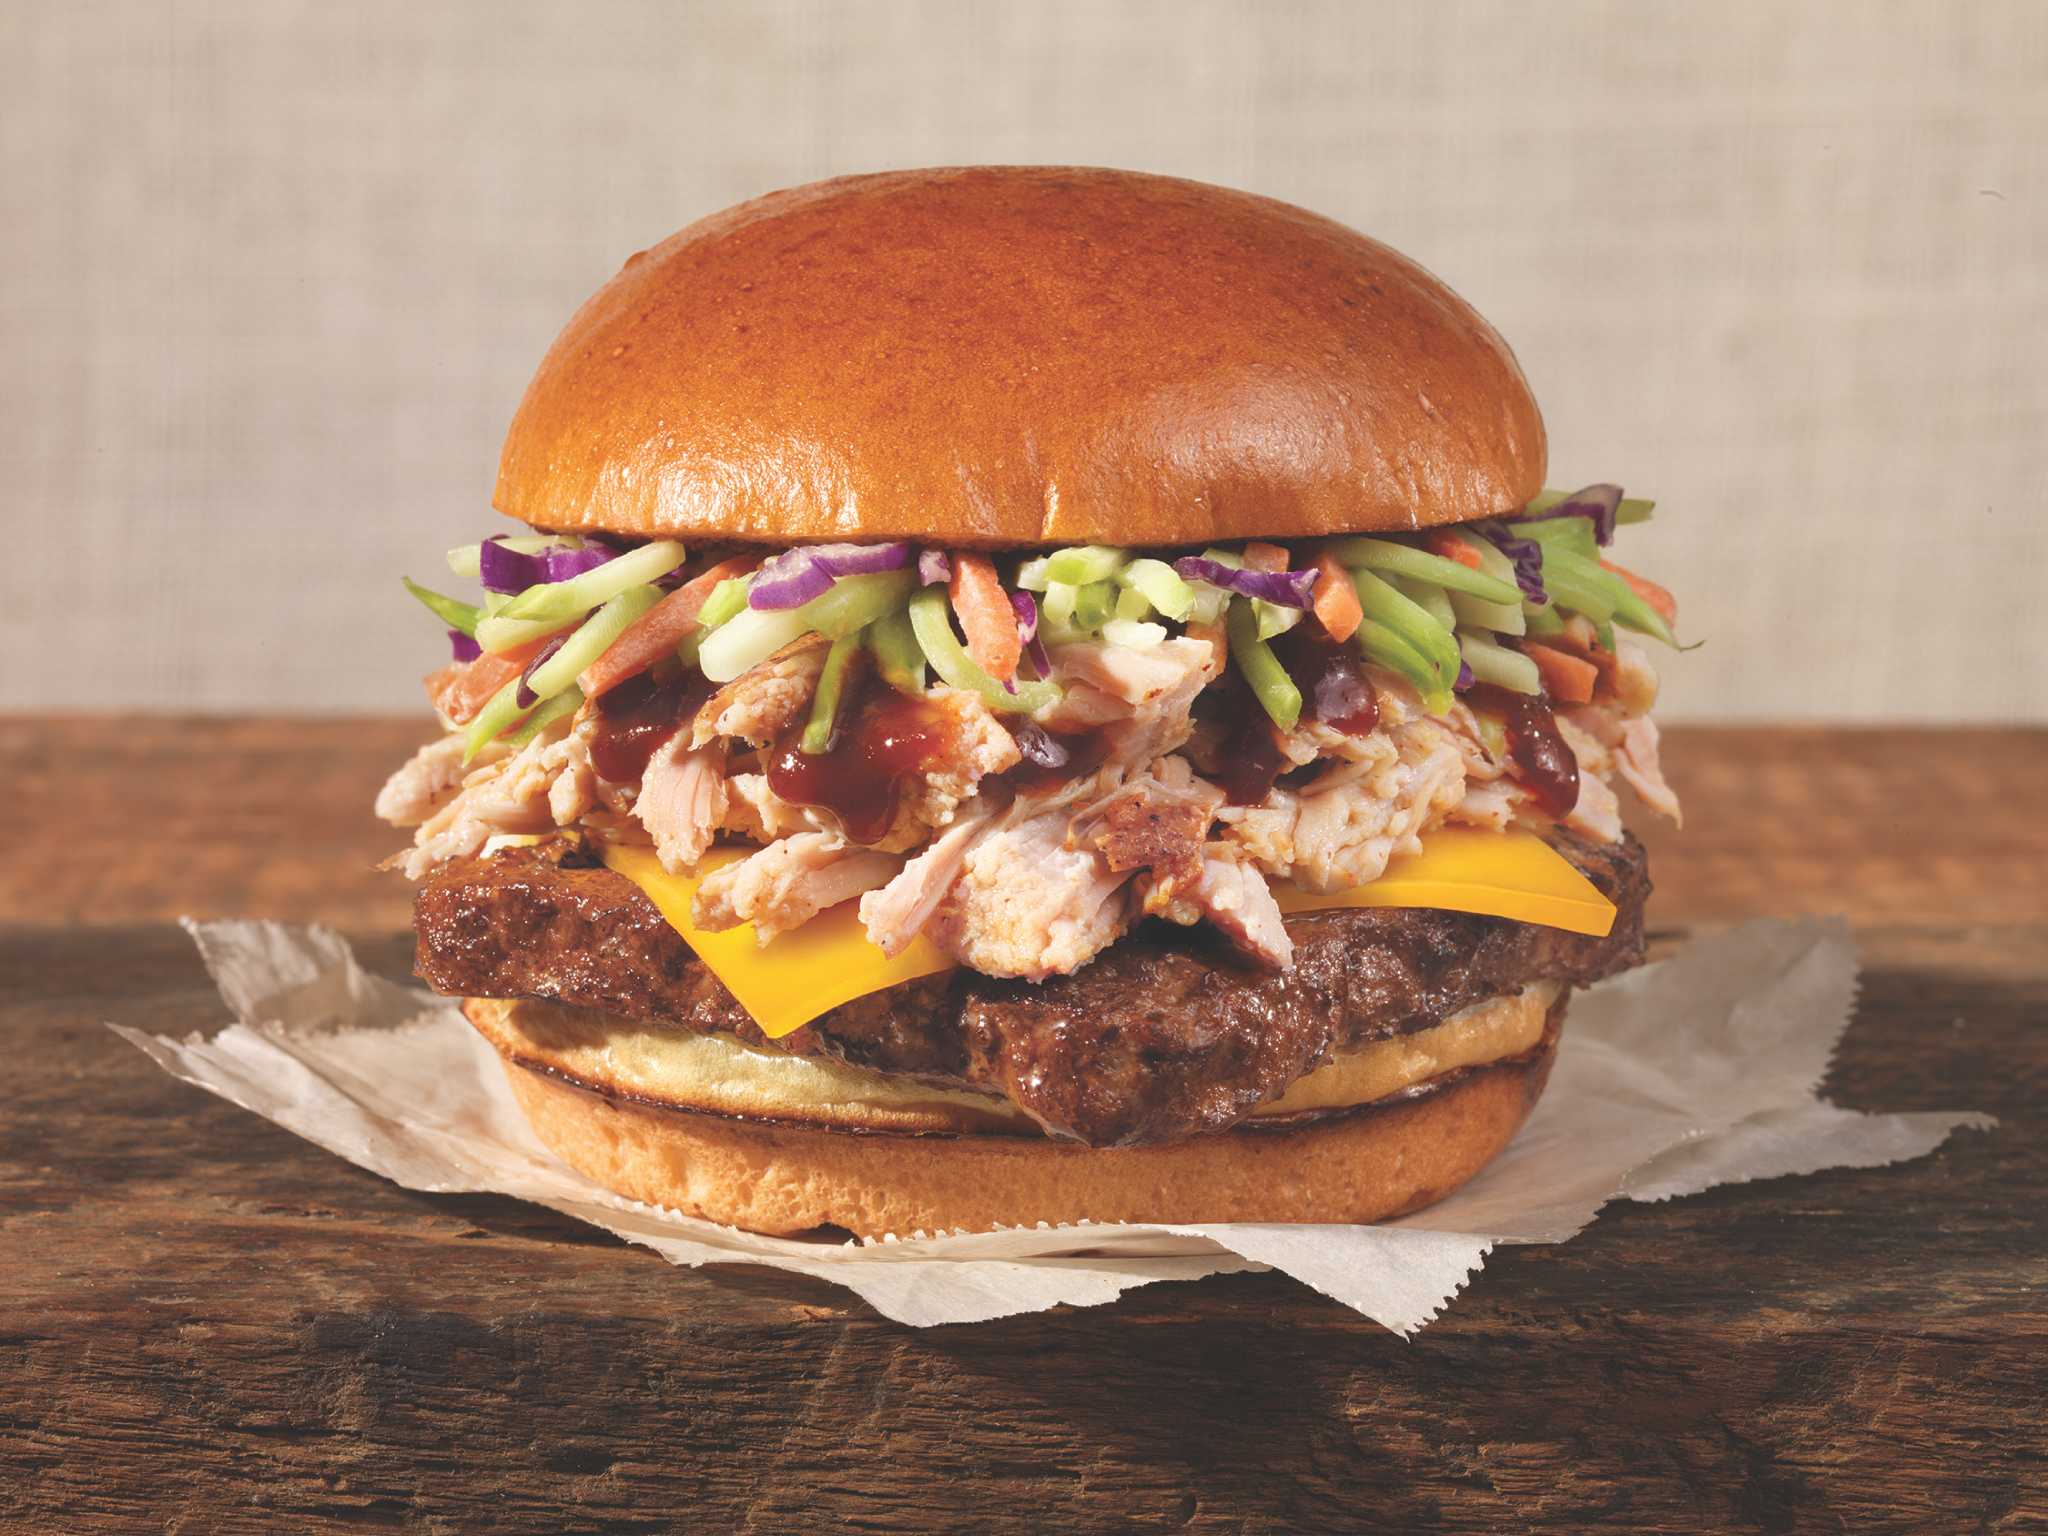 Pulled pork is perfect cheeseburger topper - Houston Chronicle2048 x 1536